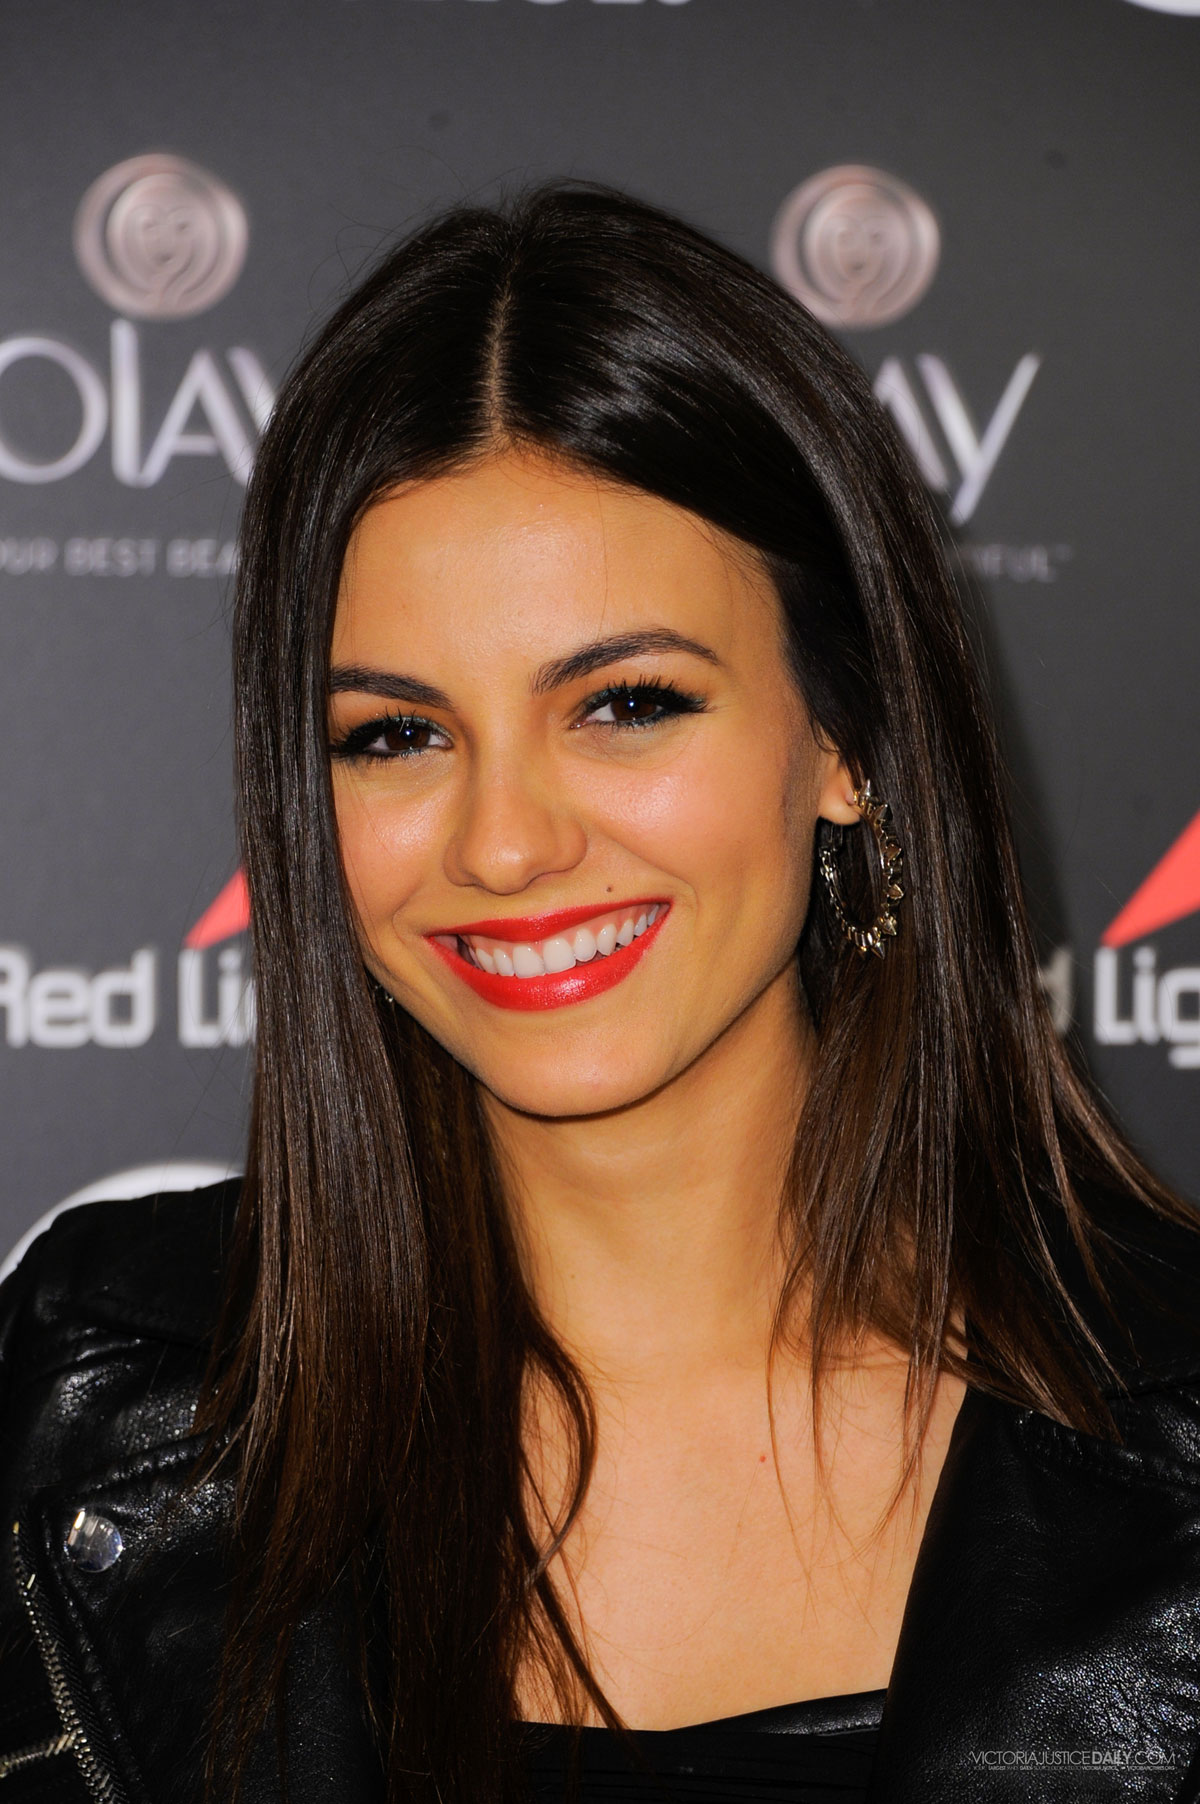 Victoria Justice attends Red Light Management Party